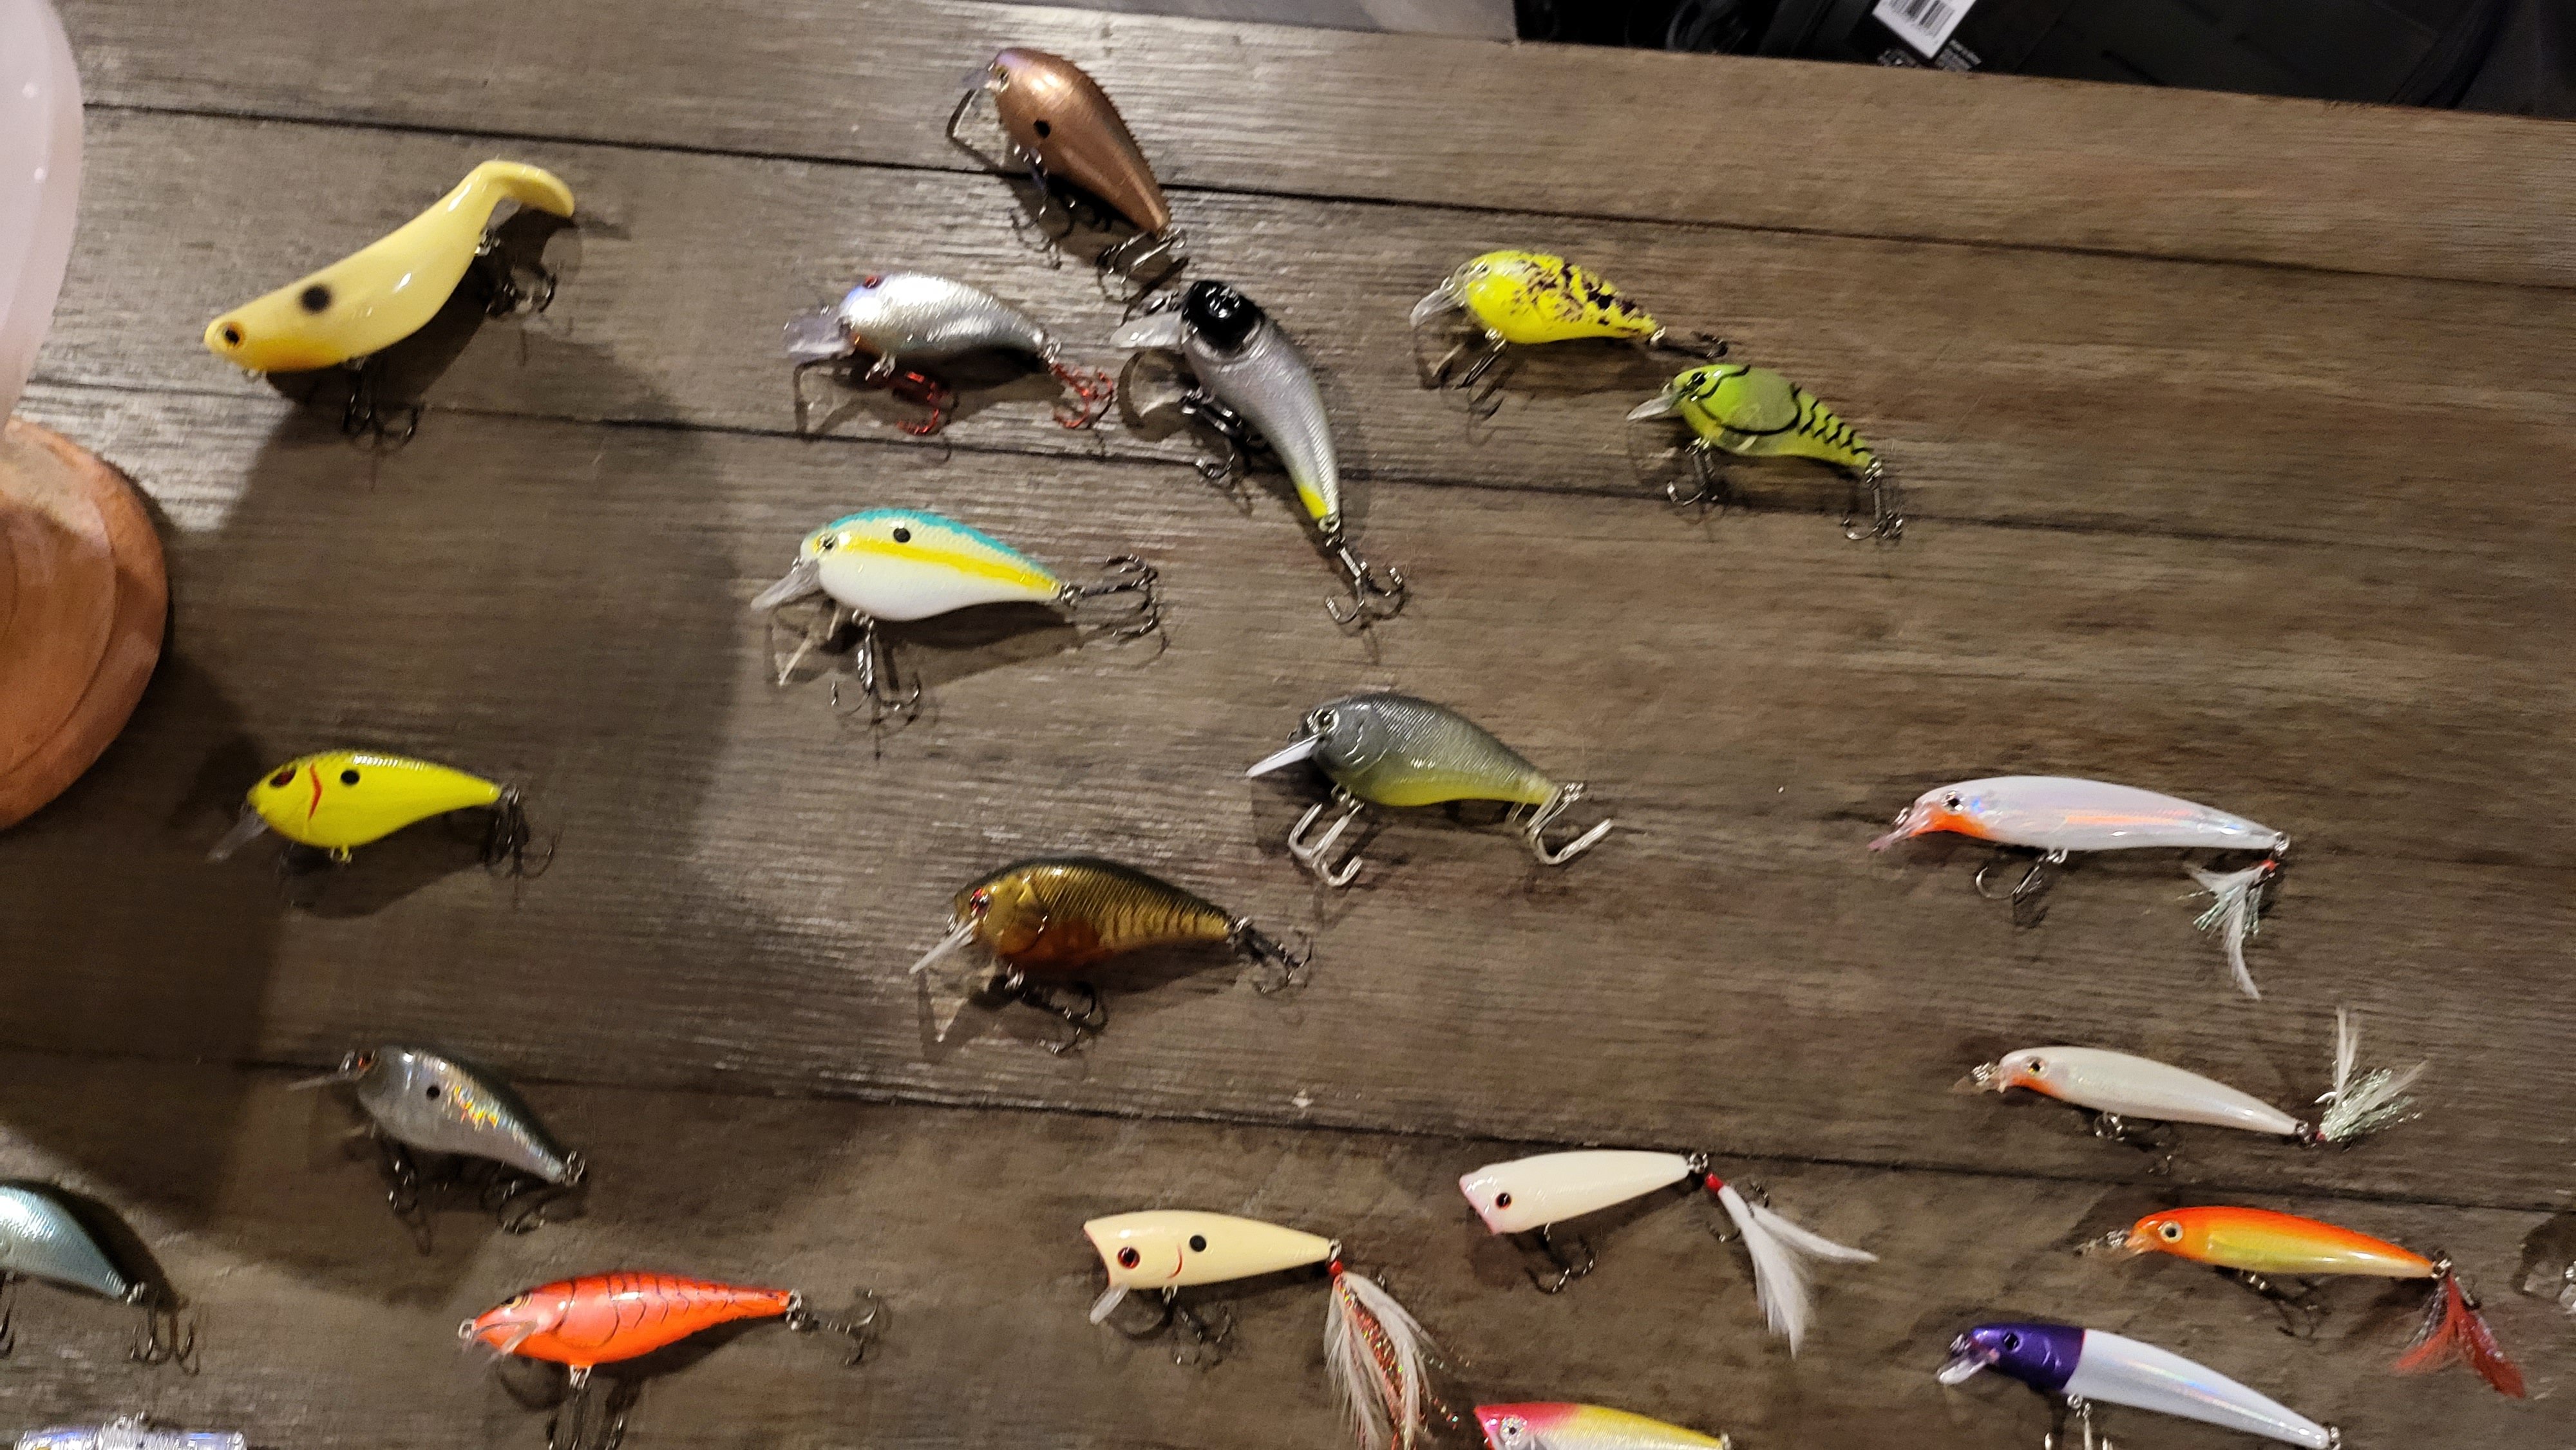 Can you name these baits? - Hard Baits -  - Tackle  Building Forums